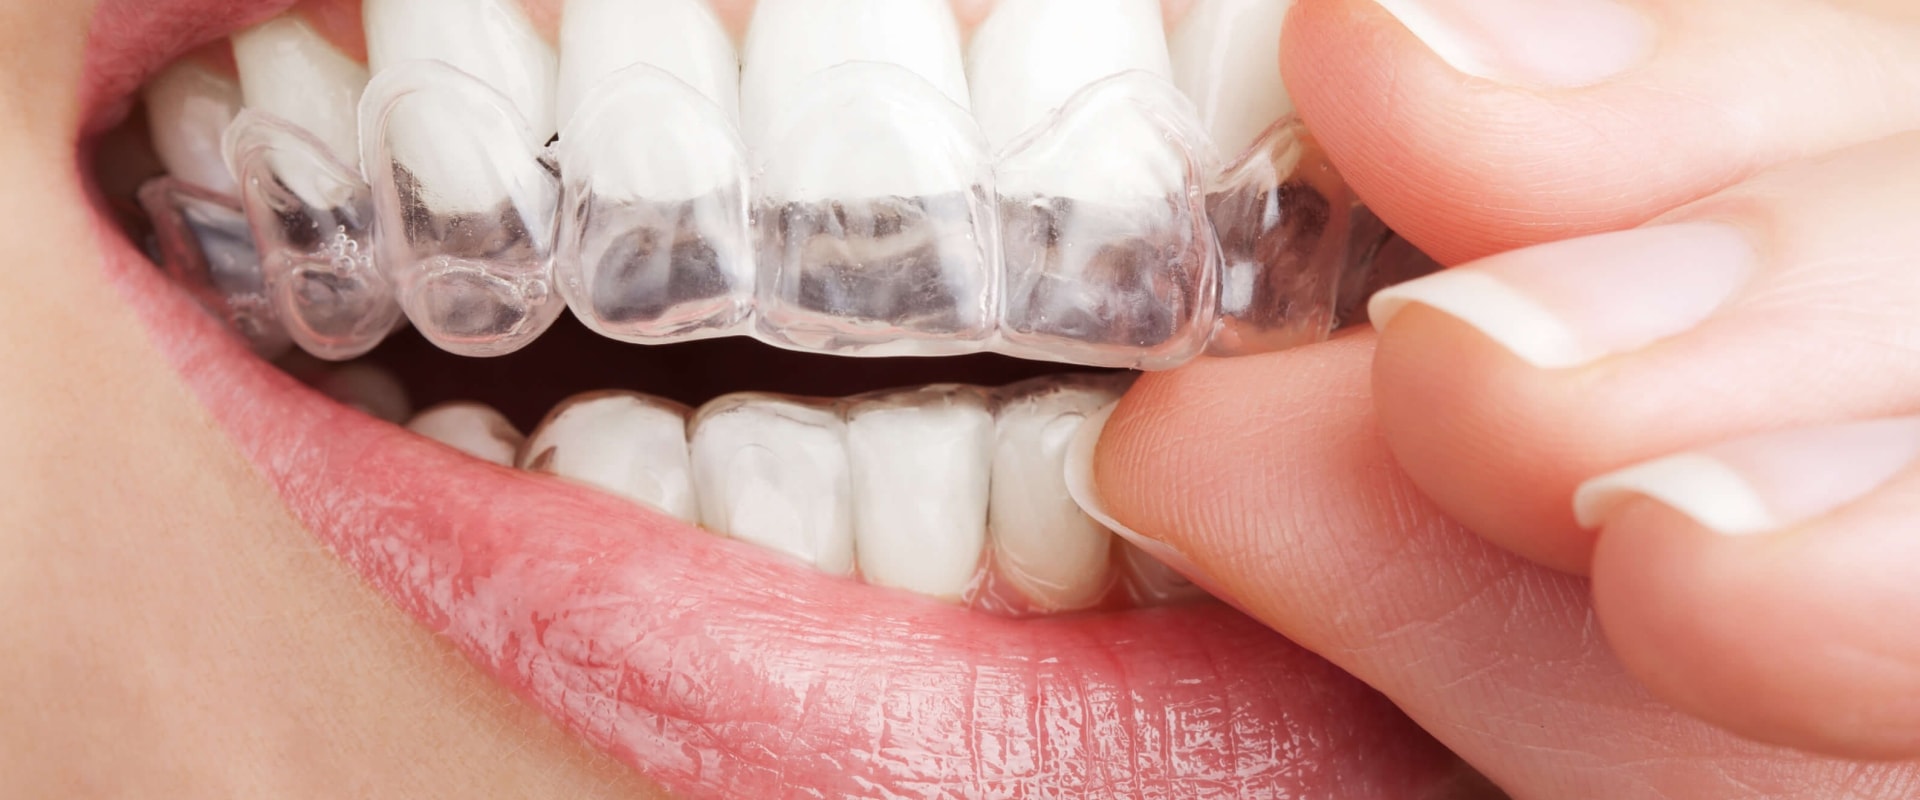 What can and cannot invisalign do?